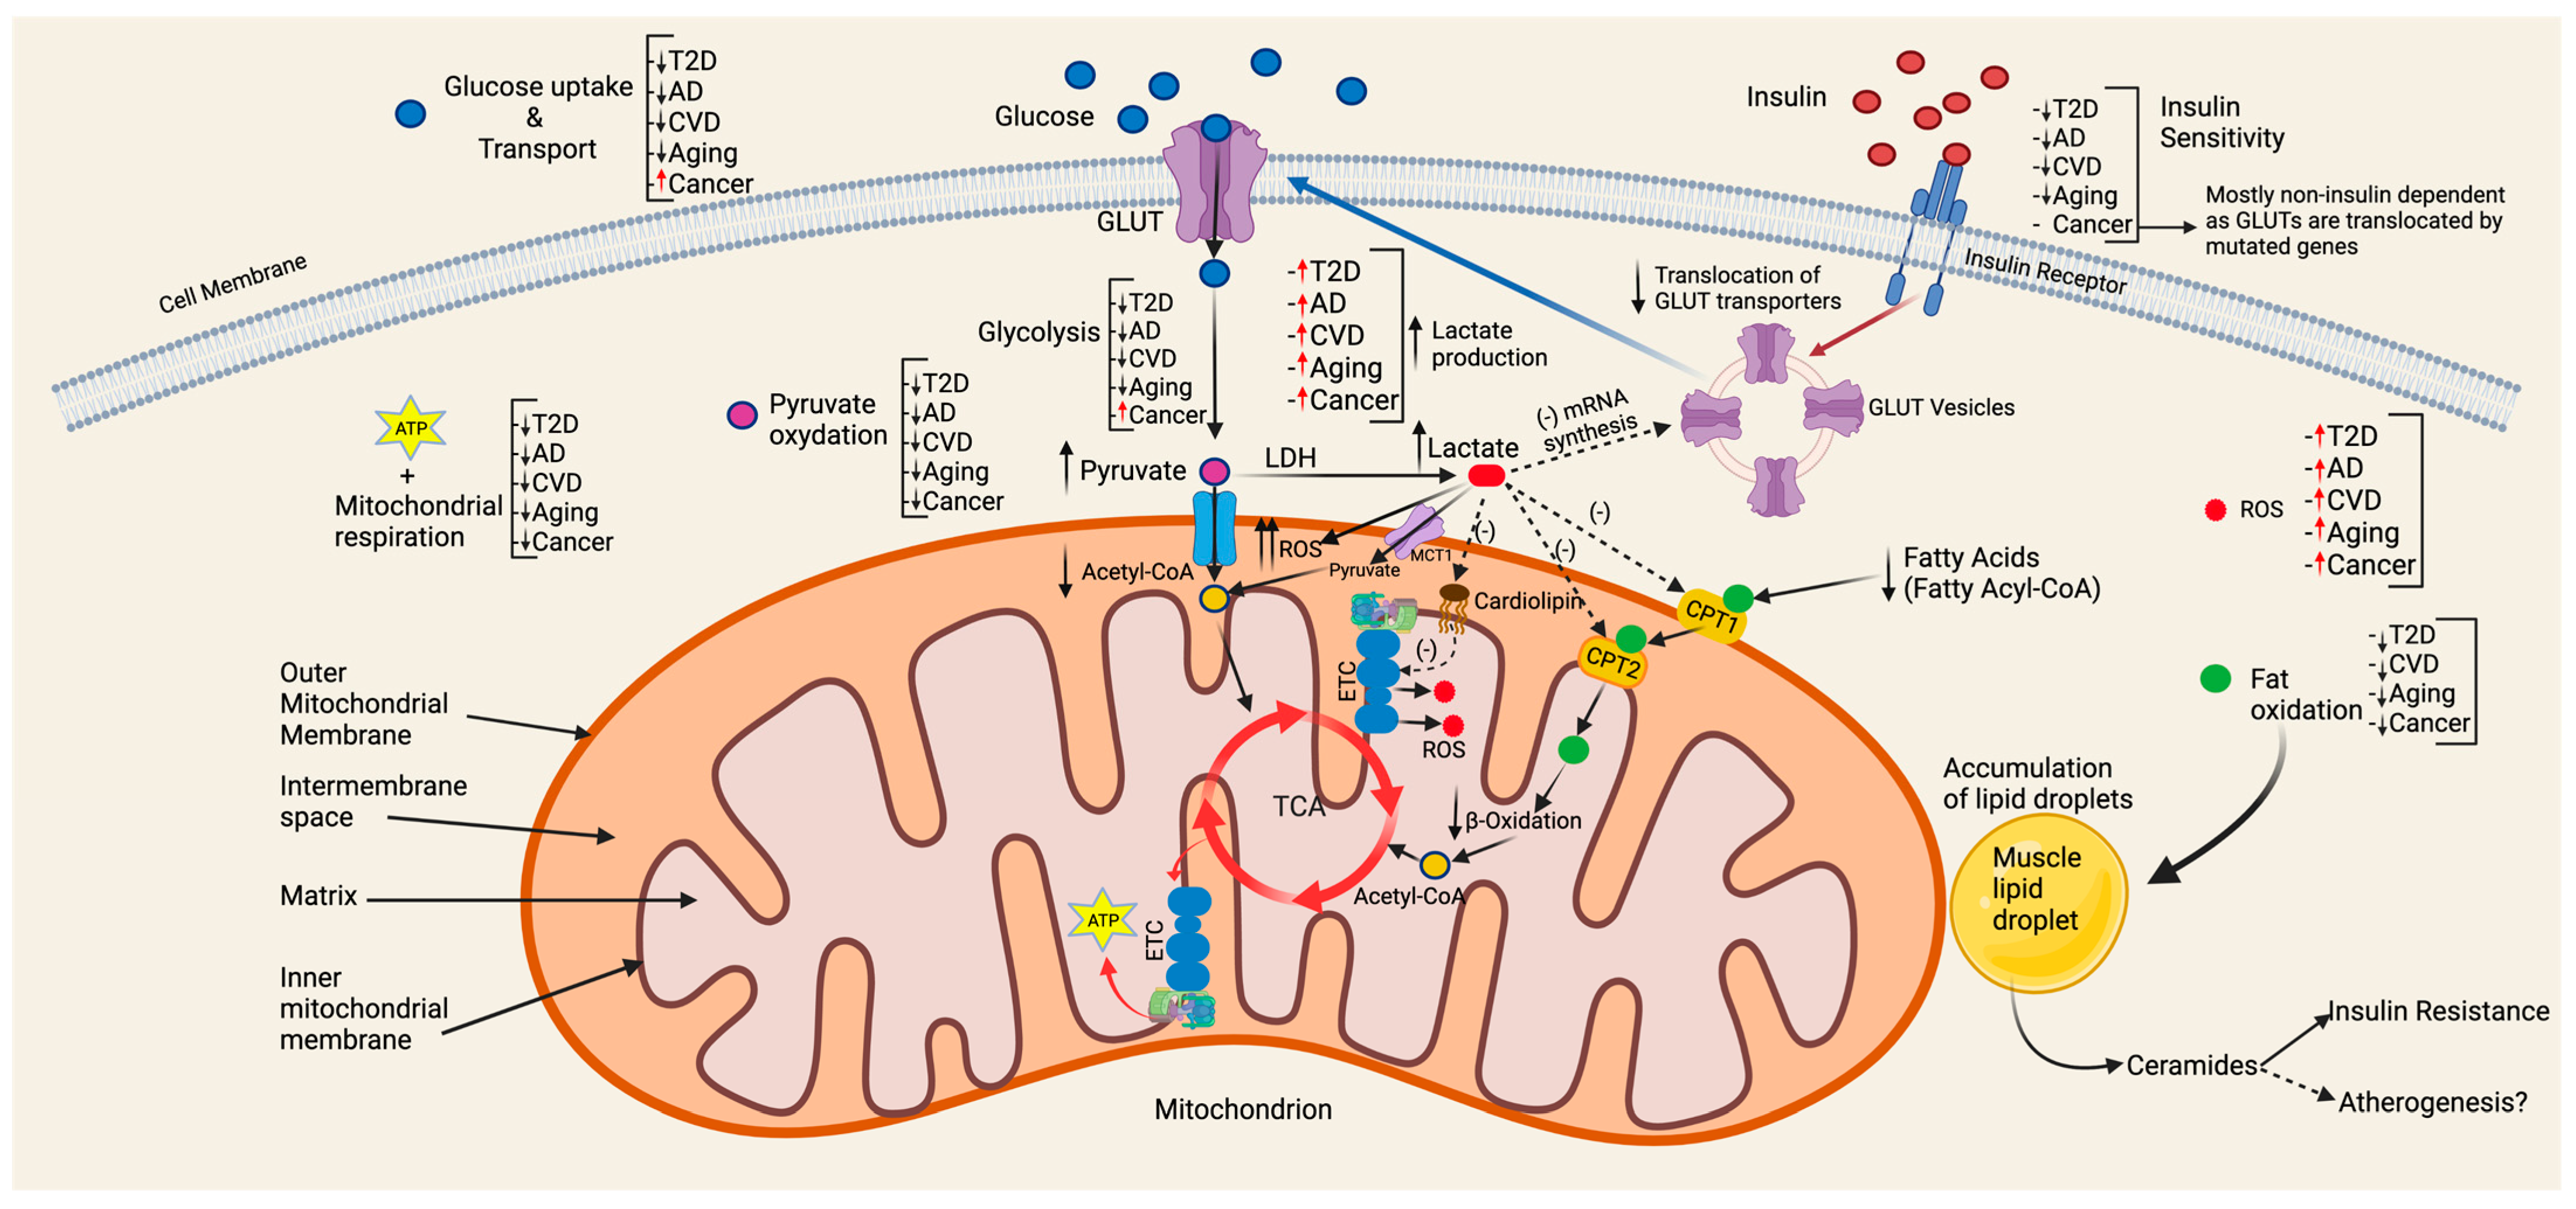 Antioxidants | Free Full-Text | The Key Role of Mitochondrial 